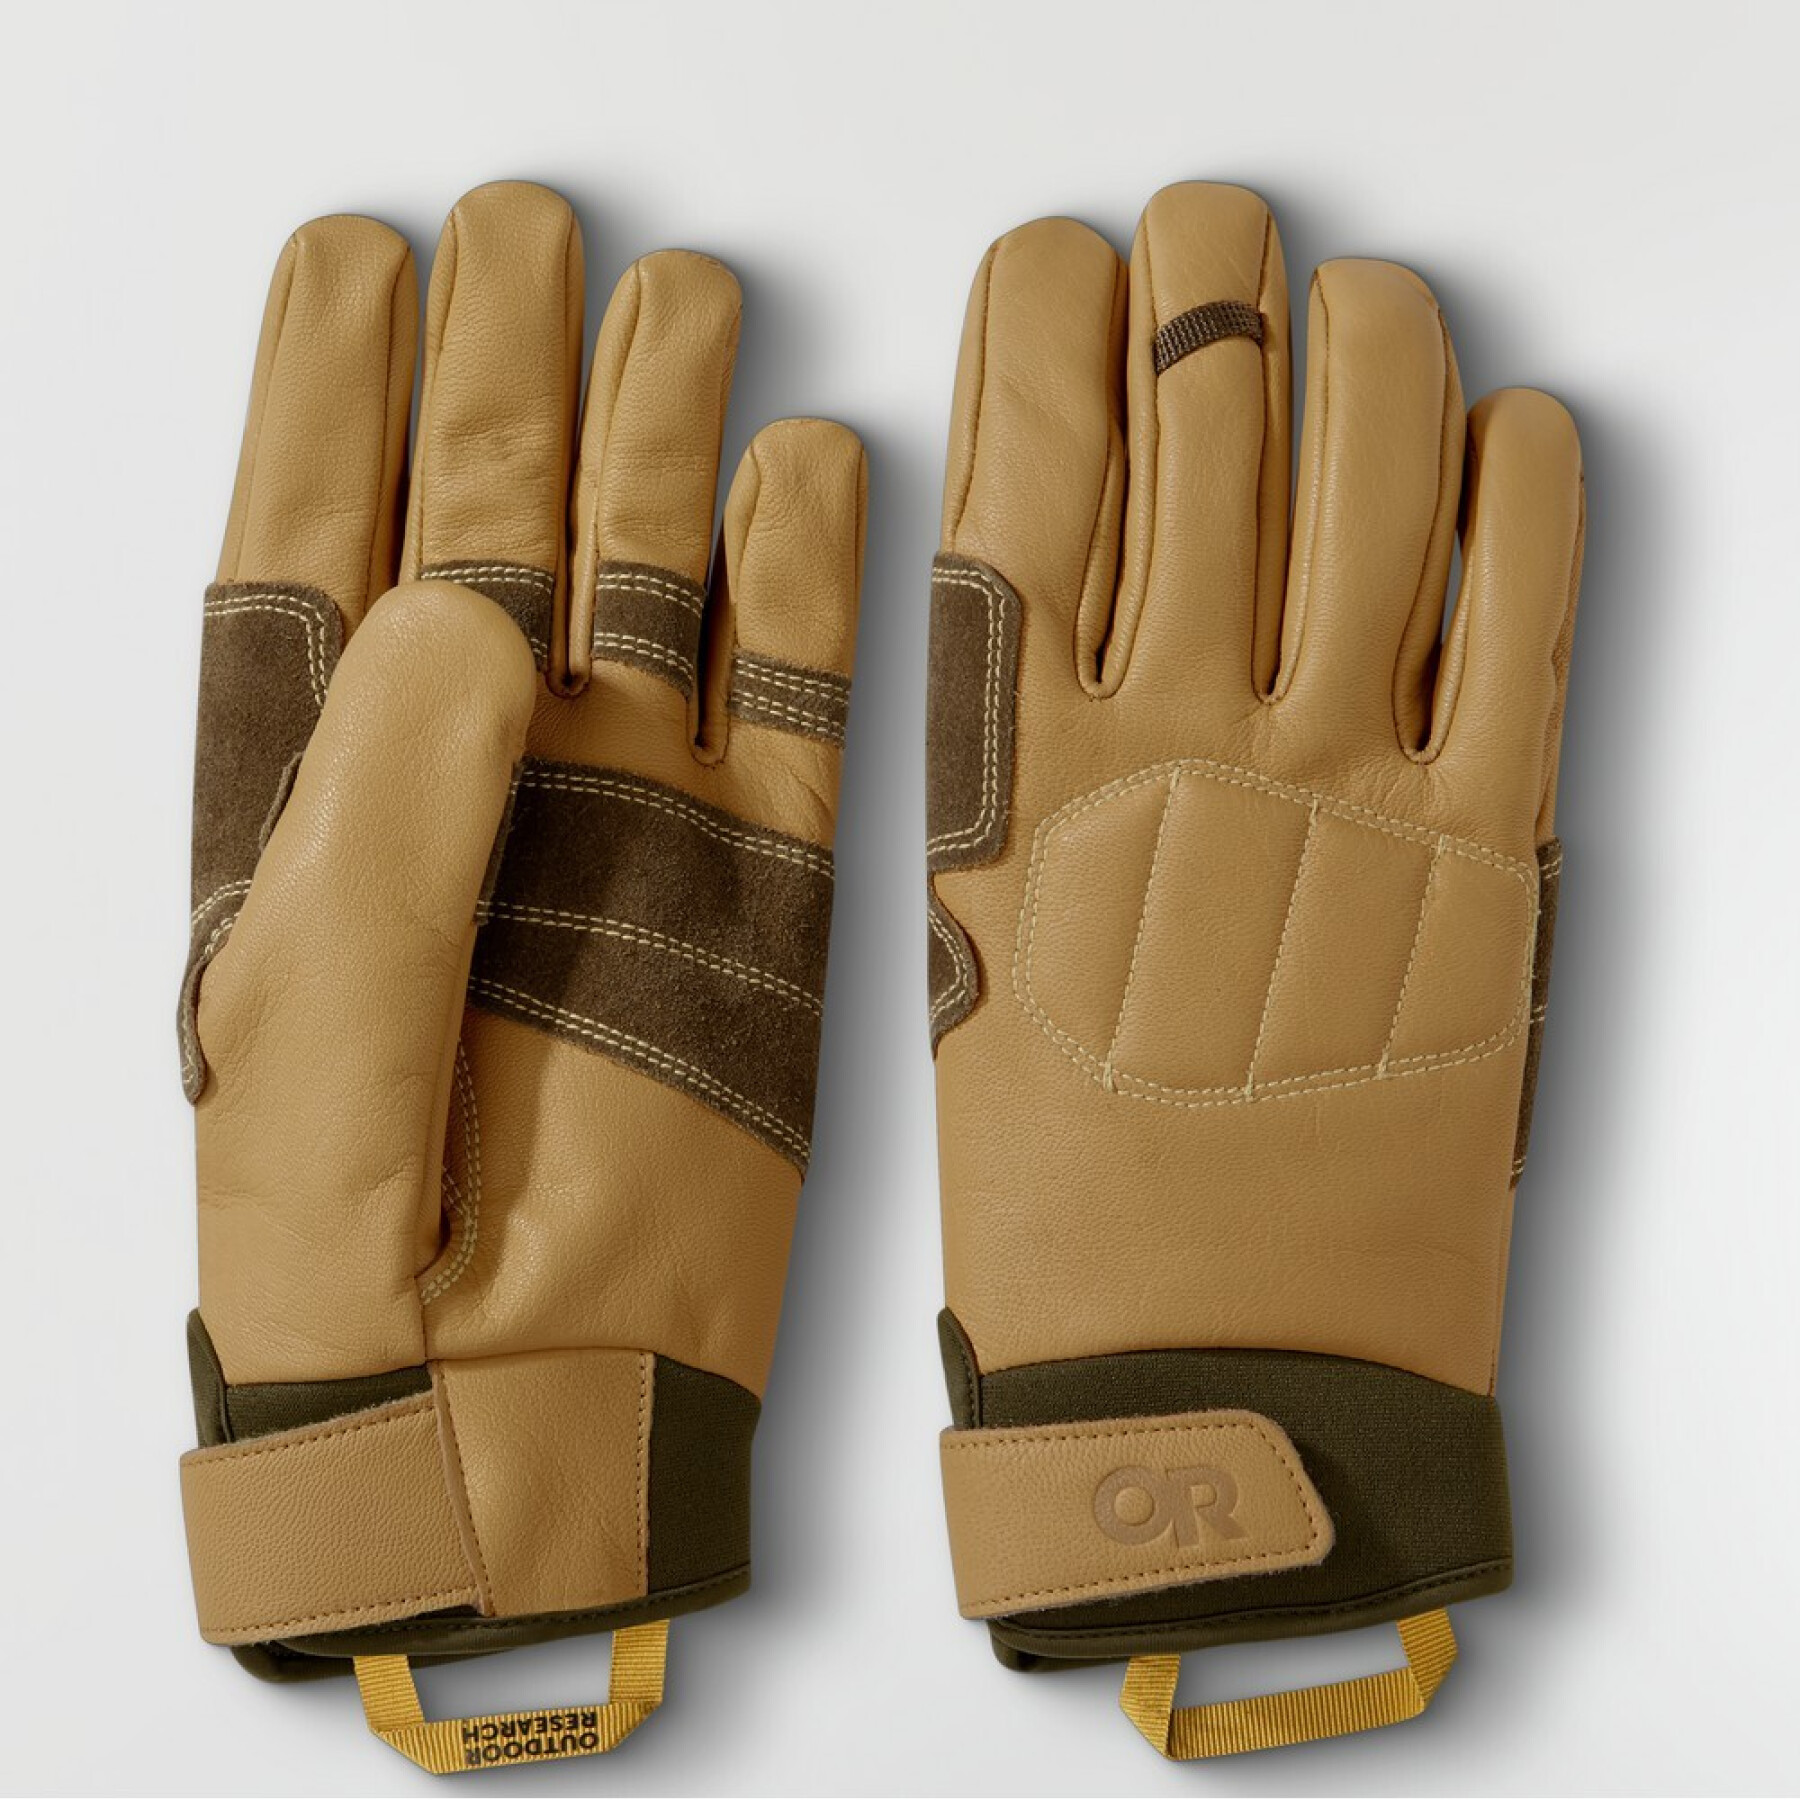 Gloves Outdoor Research Granite